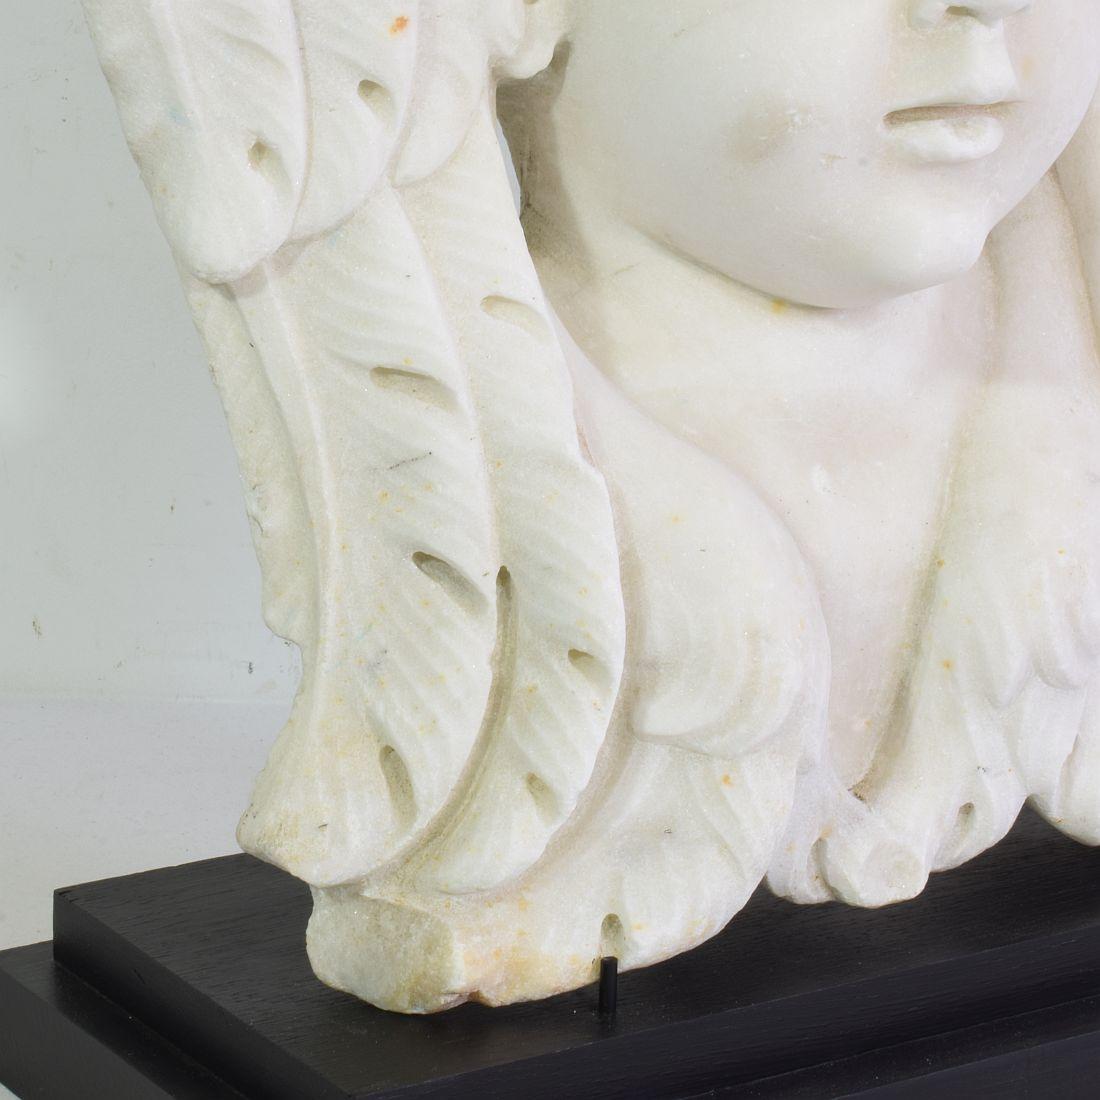 Italian, 17th / 18th Century Carved White Marble Winged Angel Head Ornament For Sale 5